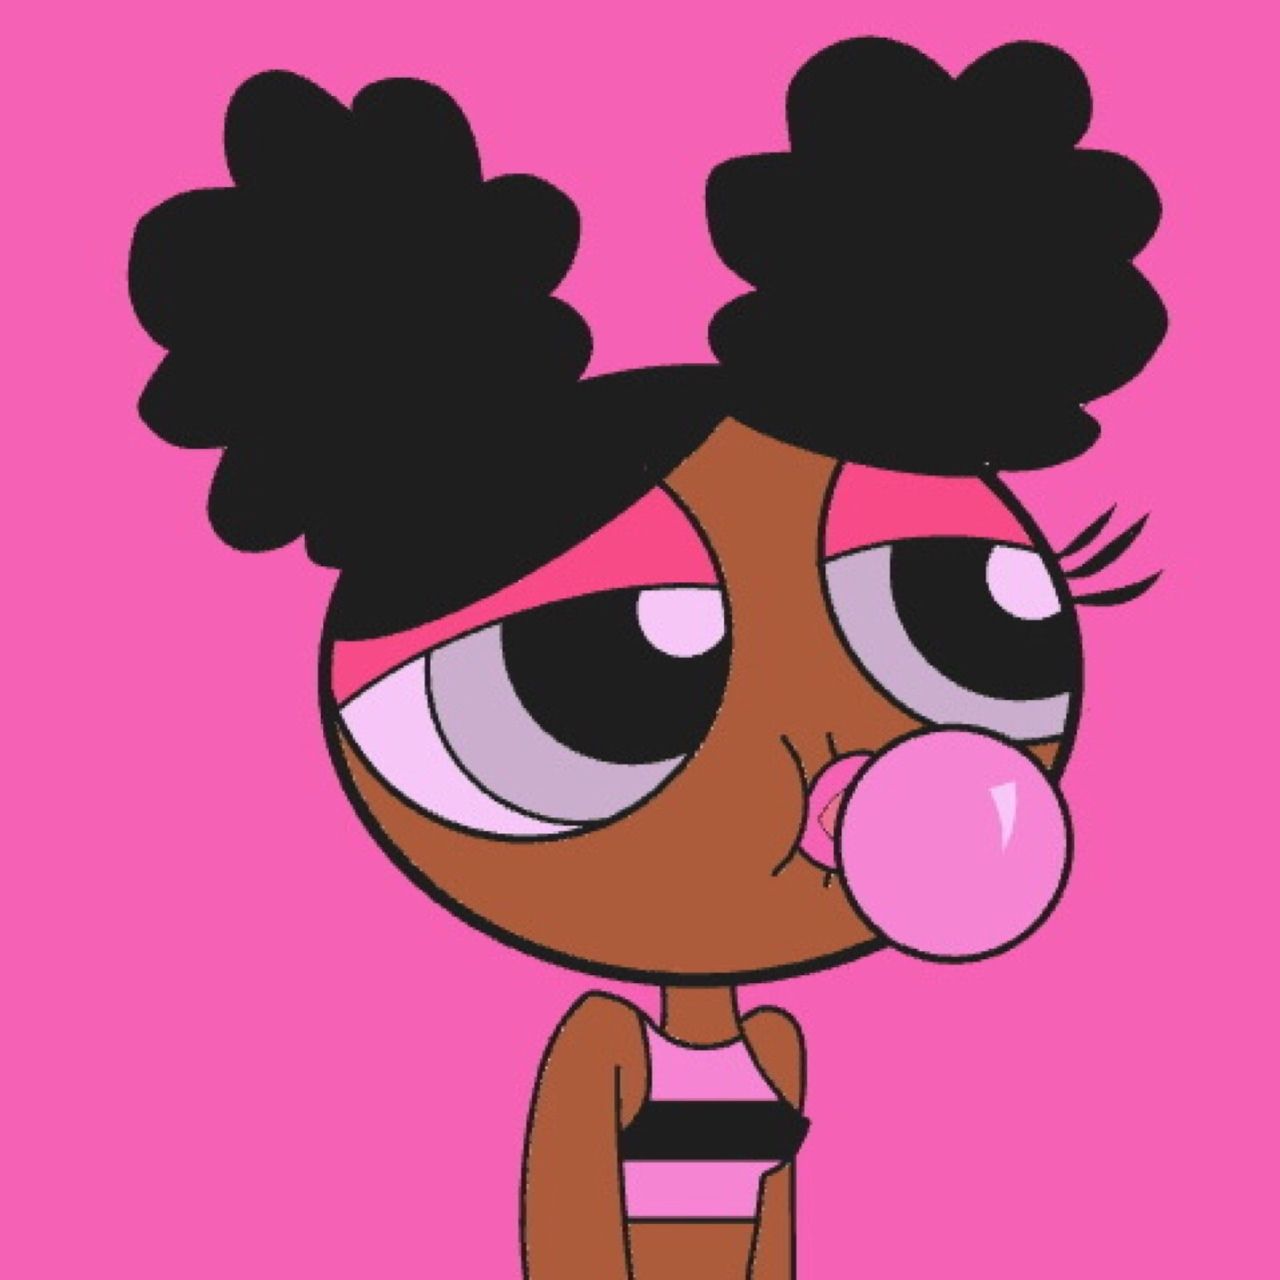 Cartoon, Pink, And Black Image Aesthetic Cartoon Characters